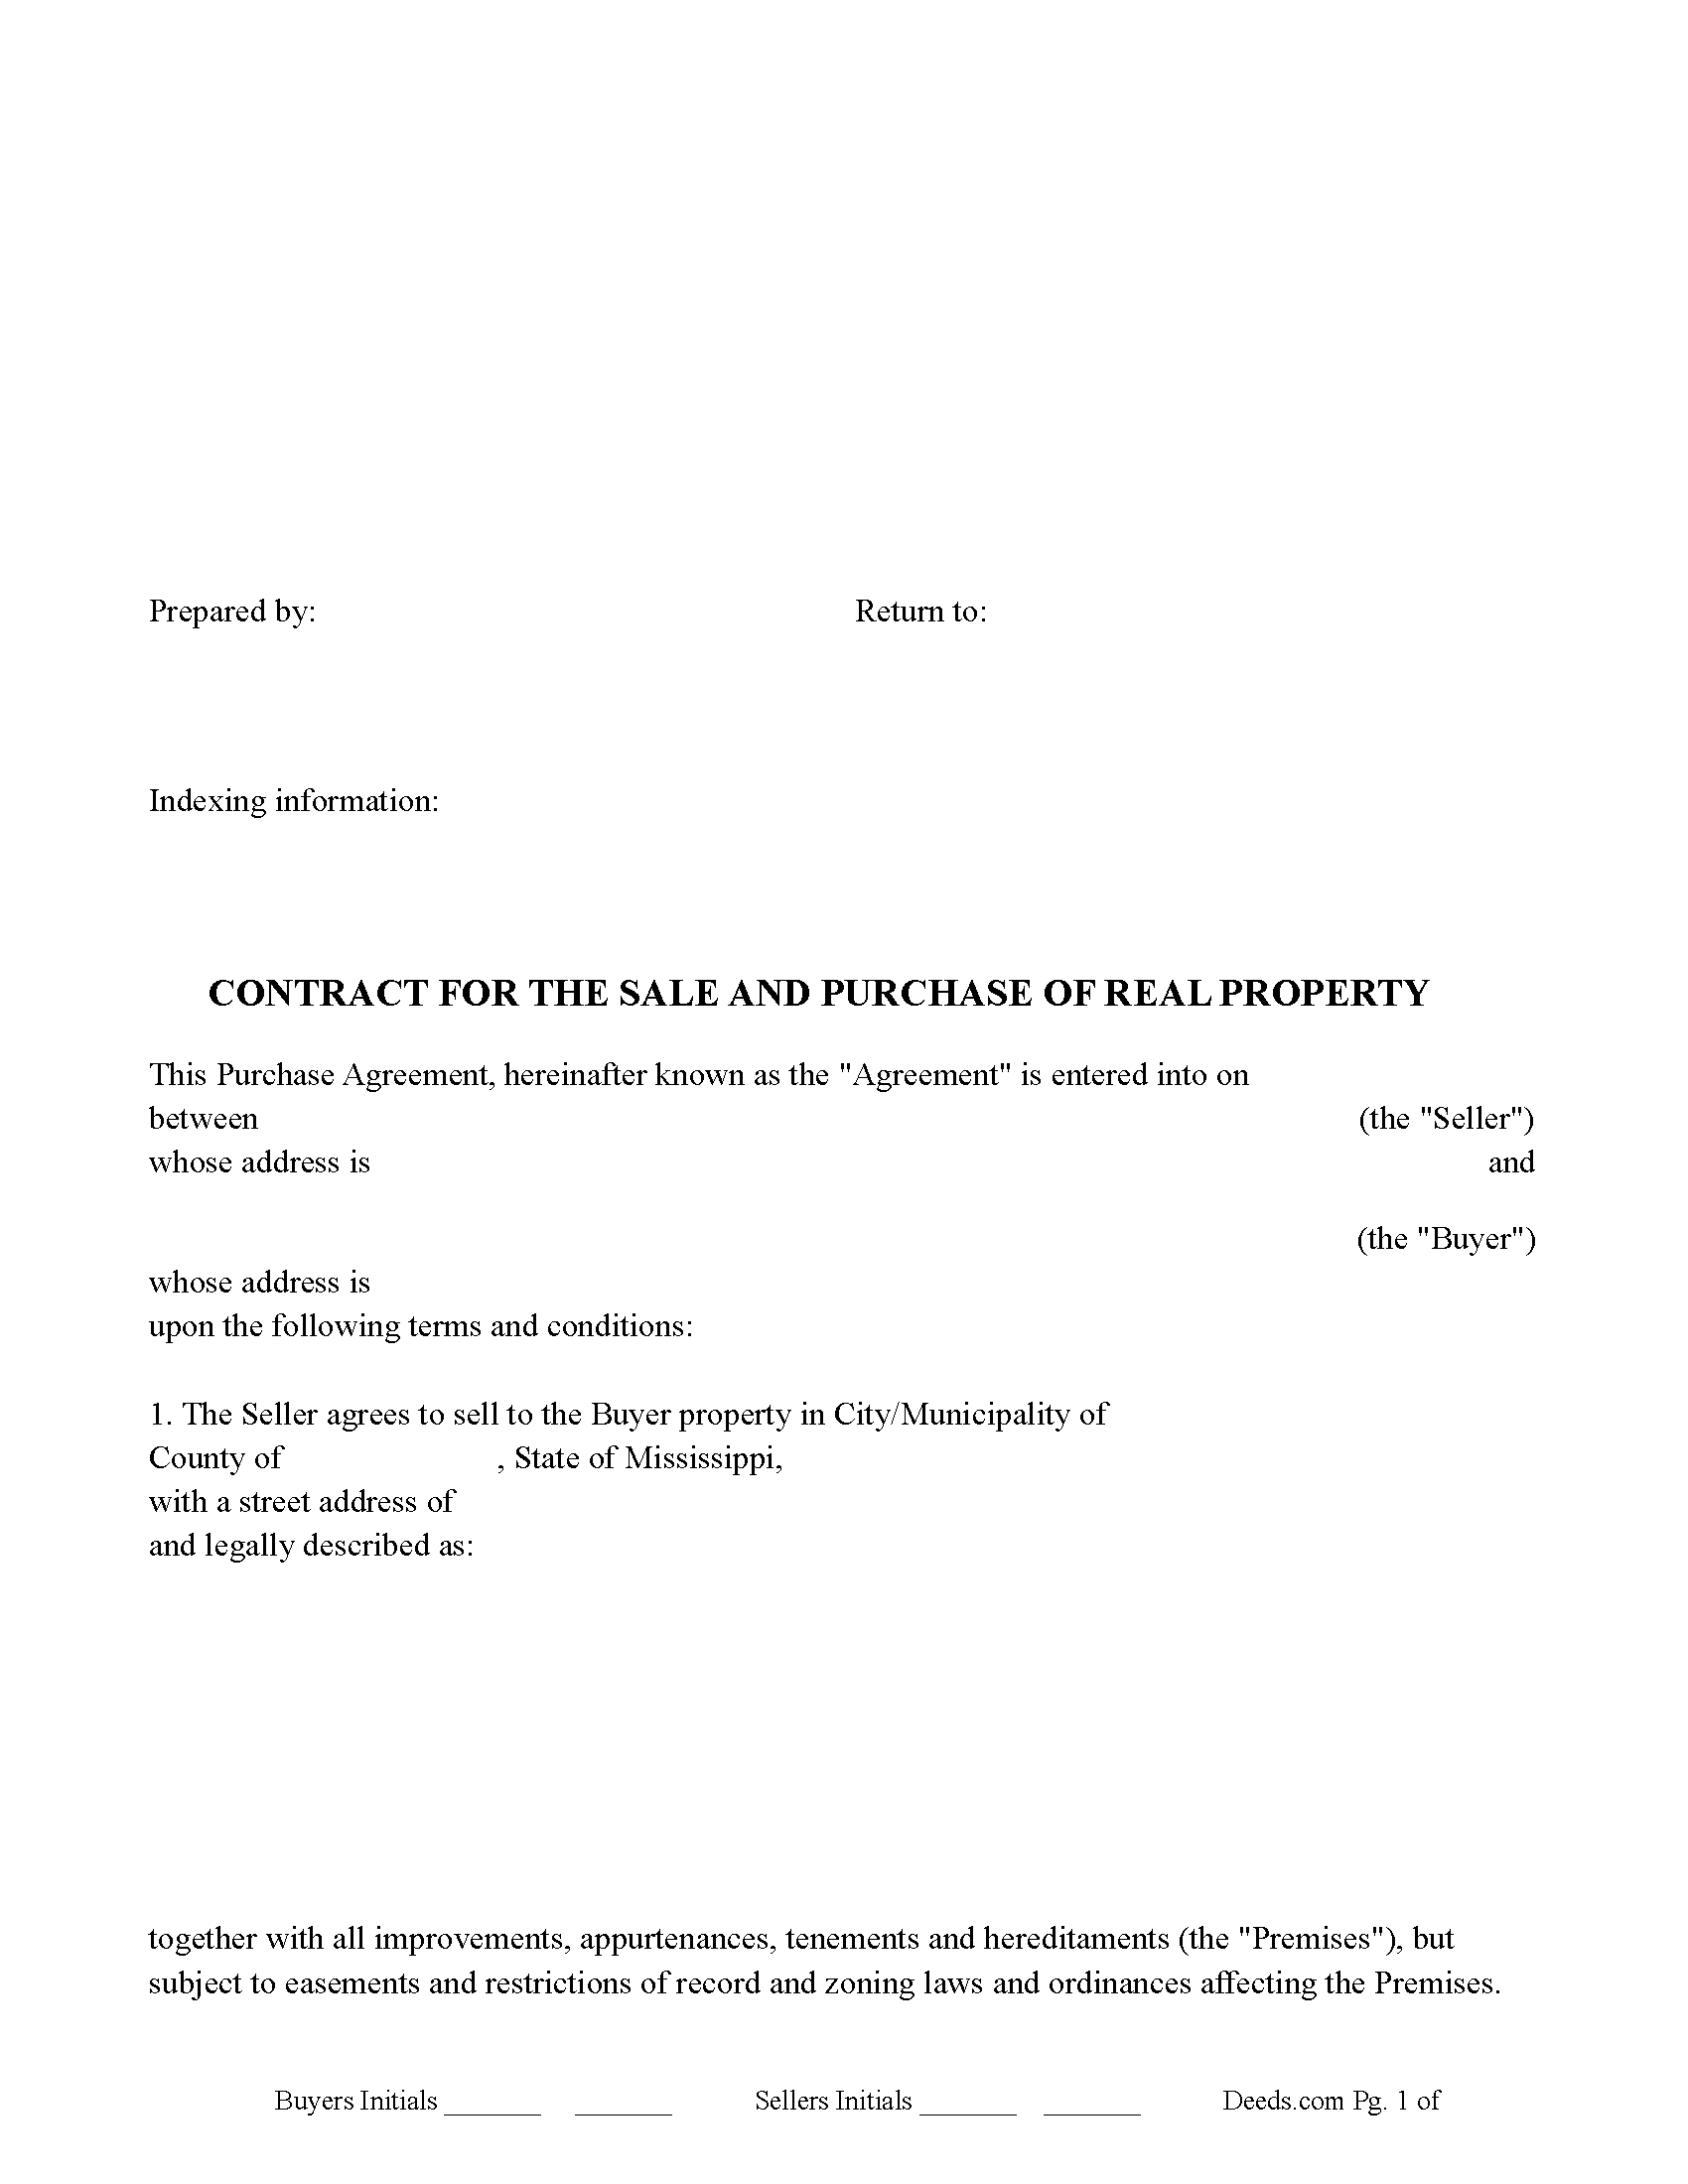 Contract for the Sale and Purchase Of Real Property Form